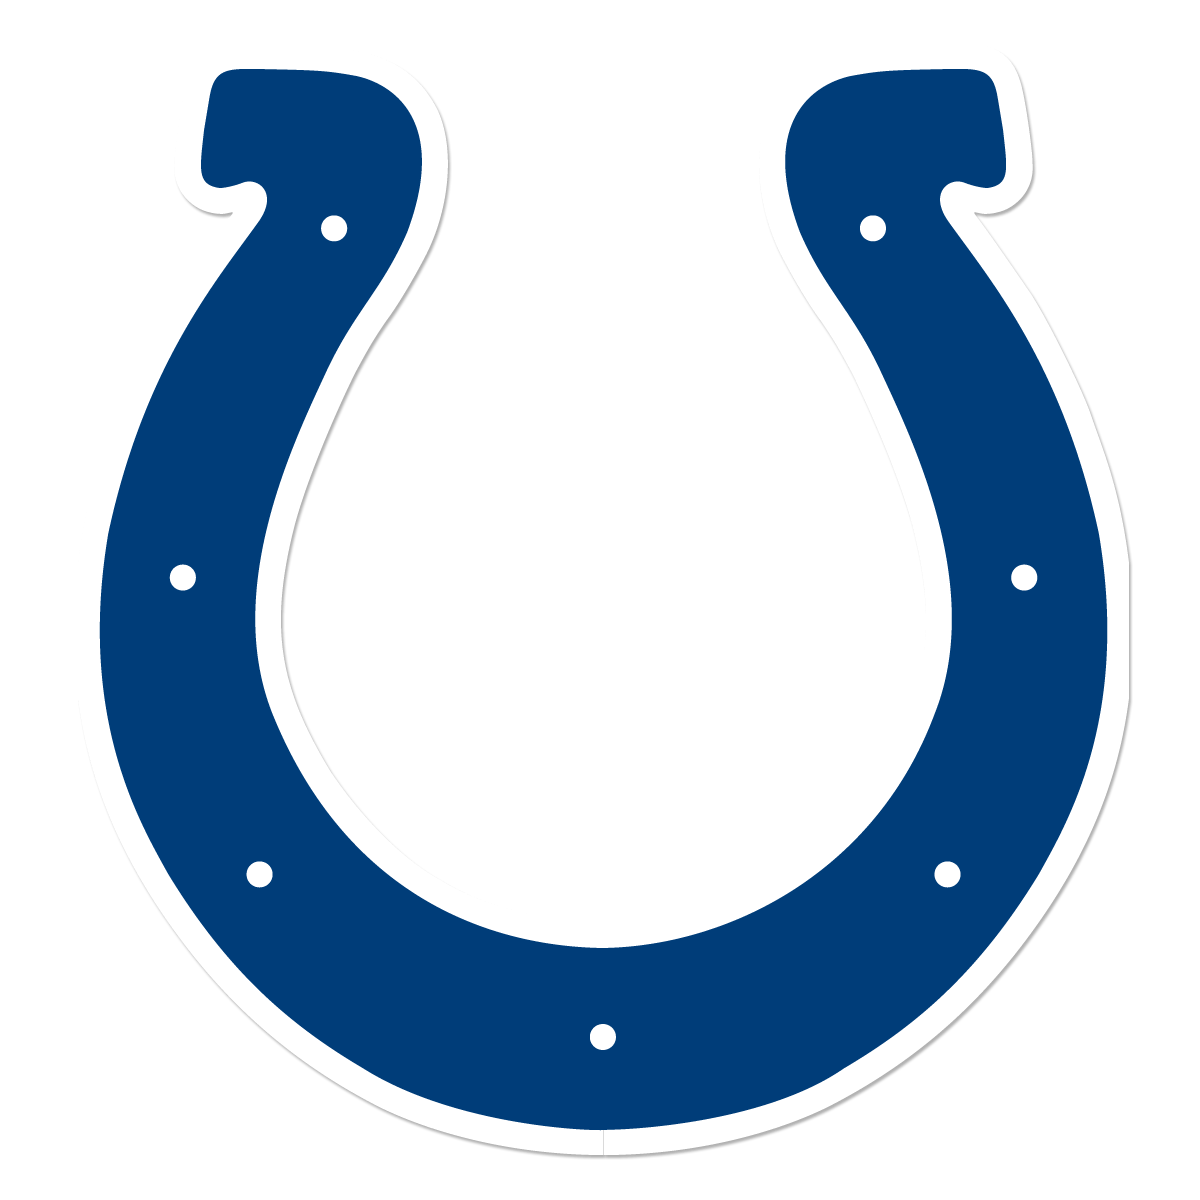 Baltimore Colts Logo - Indianapolis Colts Logo, Colts Symbol Meaning, History and Evolution